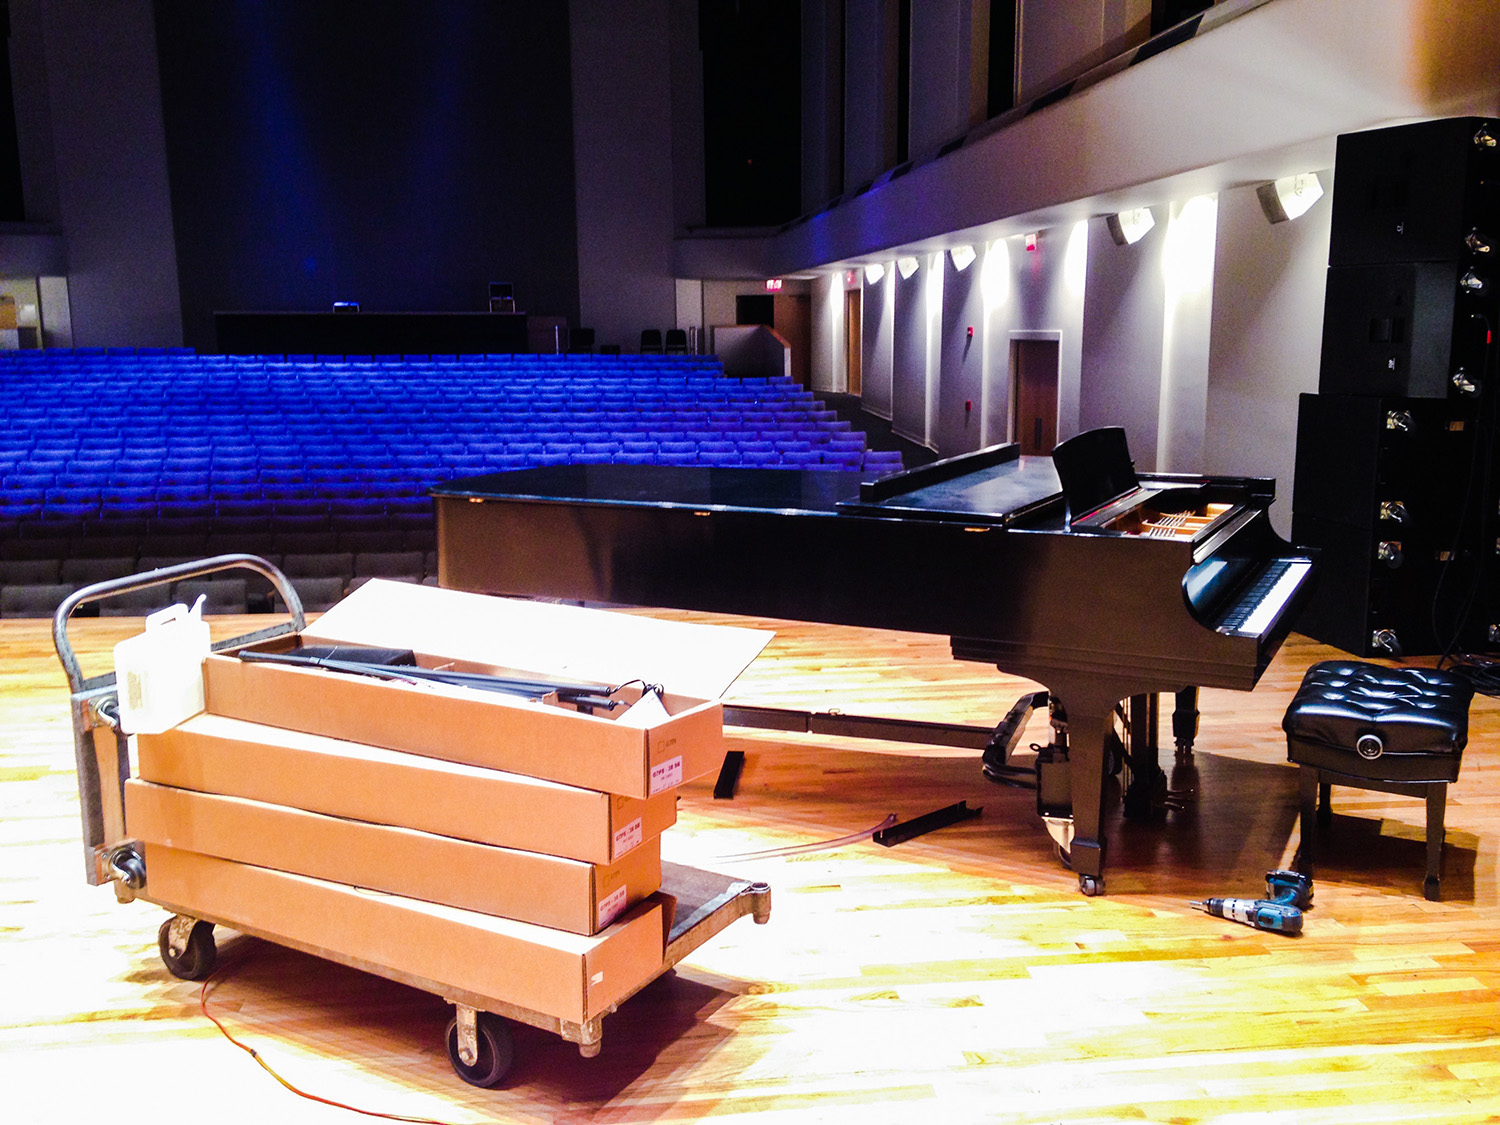 Grand Piano Life Saver Installation in a concert hall